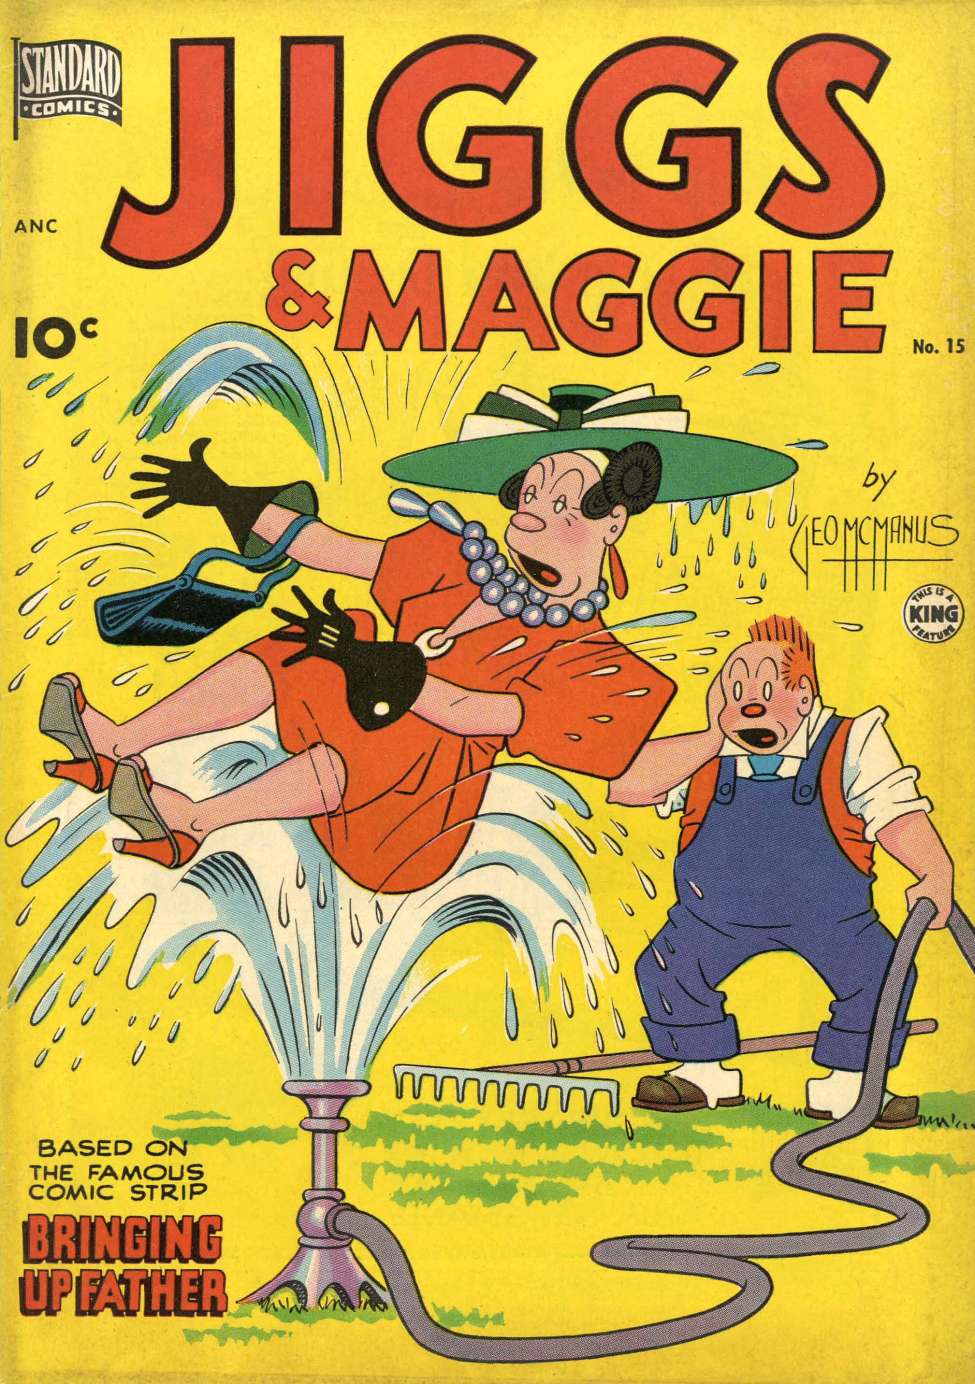 Book Cover For Jiggs & Maggie 15